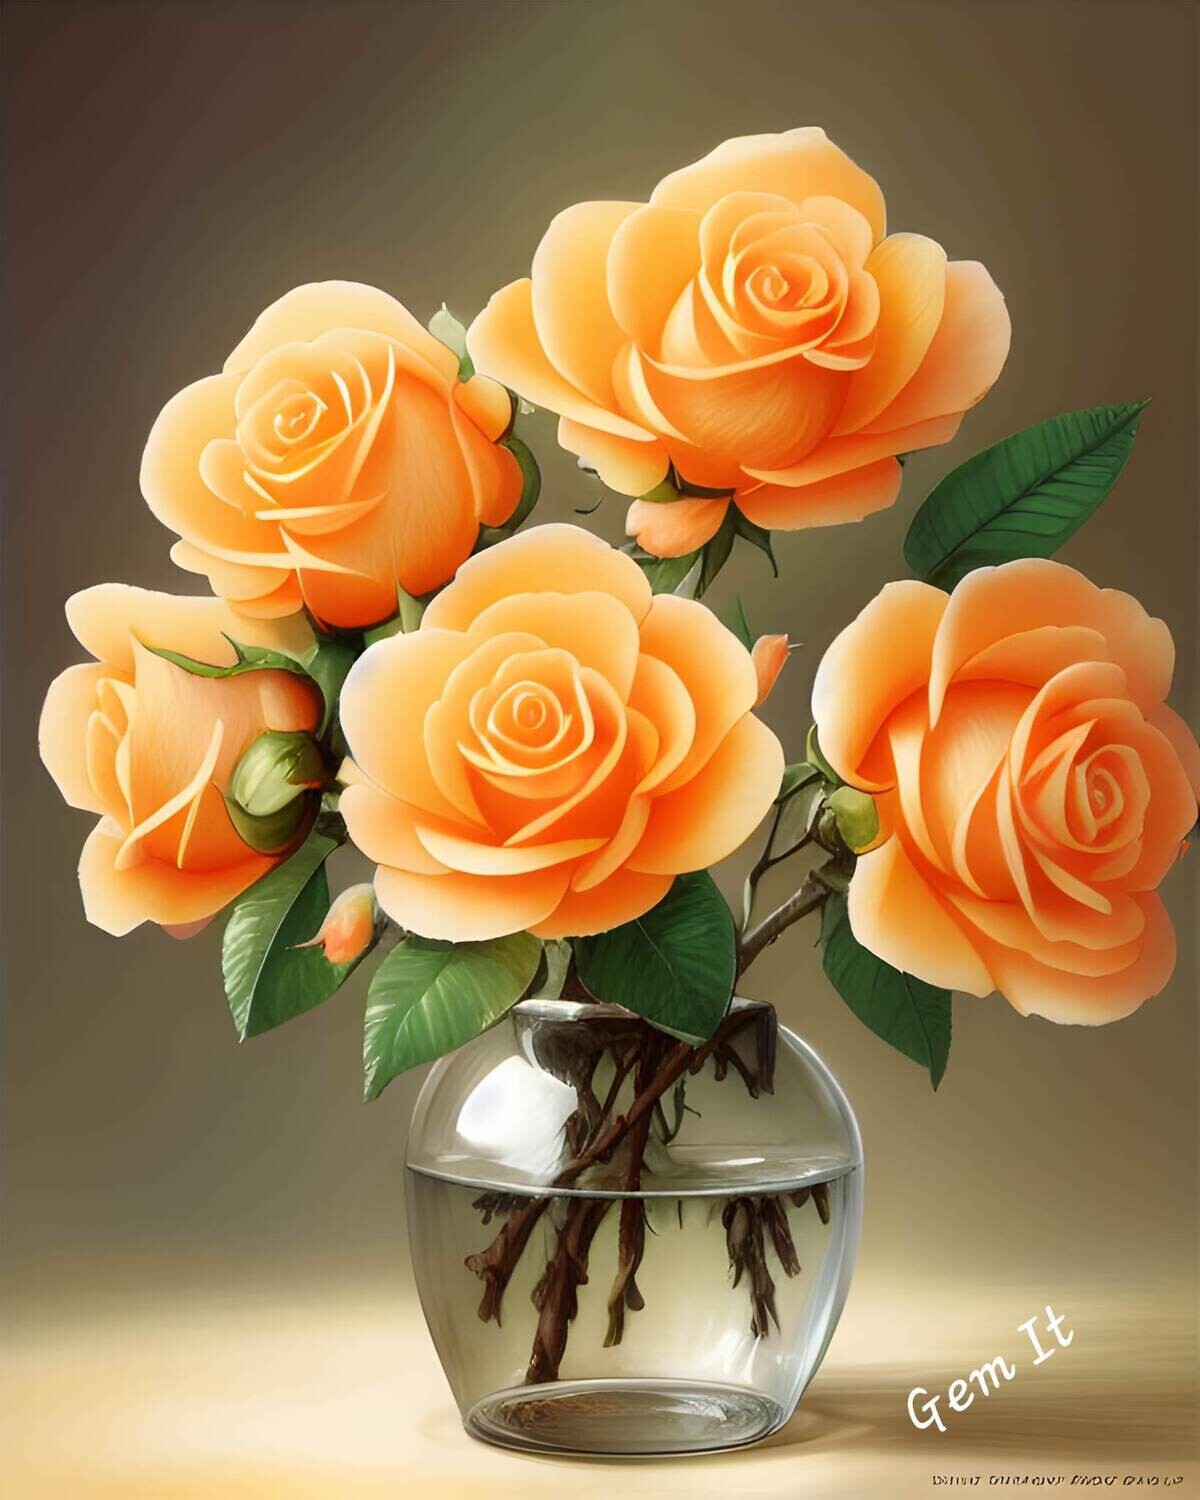 Roses Apricot 3 - Specially ordered for you. Delivery is approximately 4 - 6 weeks.